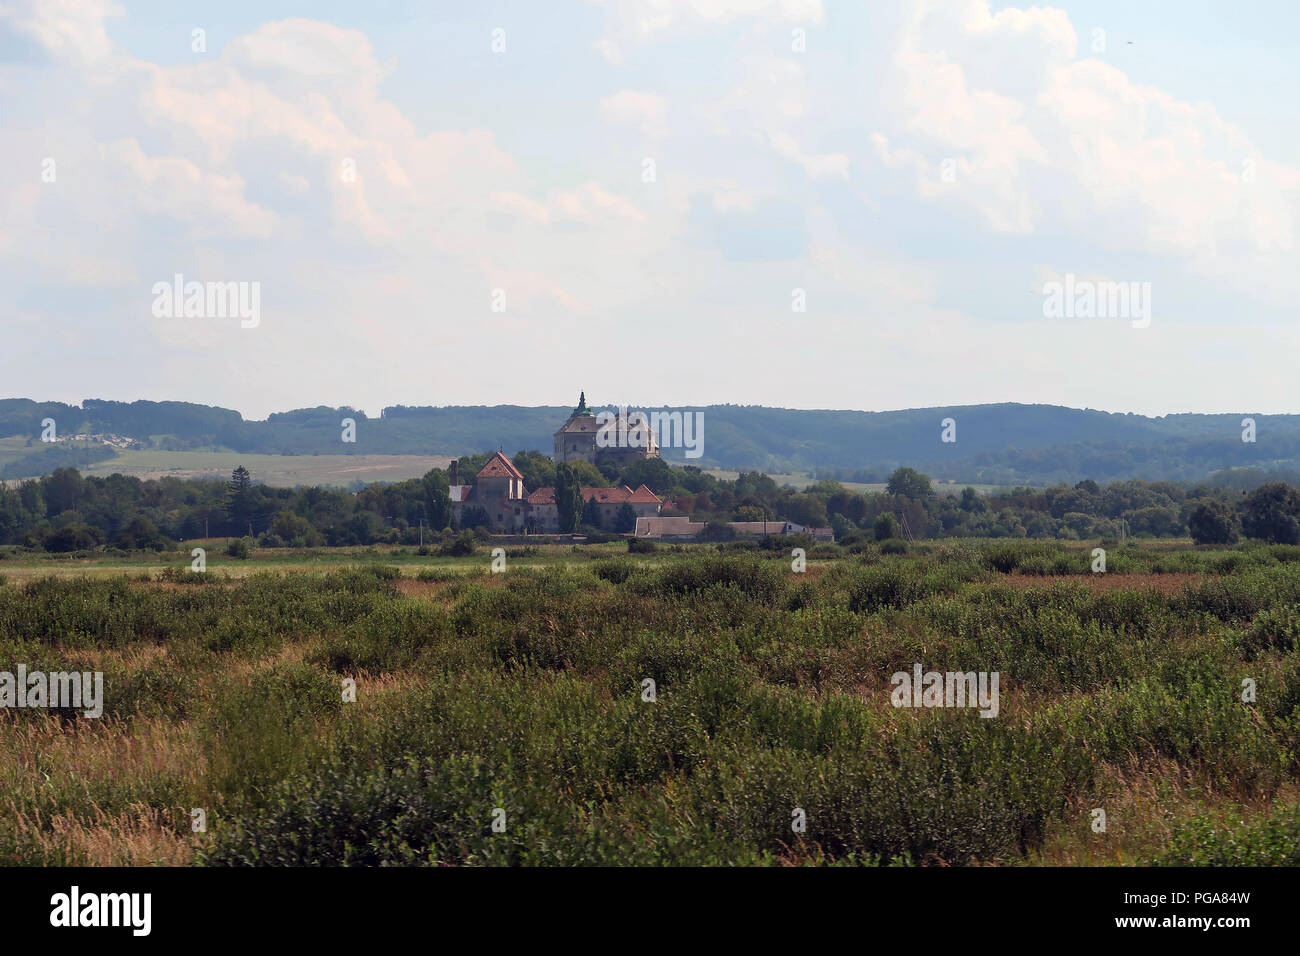 Distant view of Pidhirtsi Castle a residential castle-fortress built in 1640 located in the village of Pidhirtsi in Lviv Oblast (province) western Ukraine, located 80 kilometers east of Lviv.  The castle was then part of the Kingdom of Poland and it is regarded as the most valuable of palace-garden complexes in the eastern borderlands (Kresy Wschodnie) of the former Polish-Lithuanian Commonwealth. Stock Photo